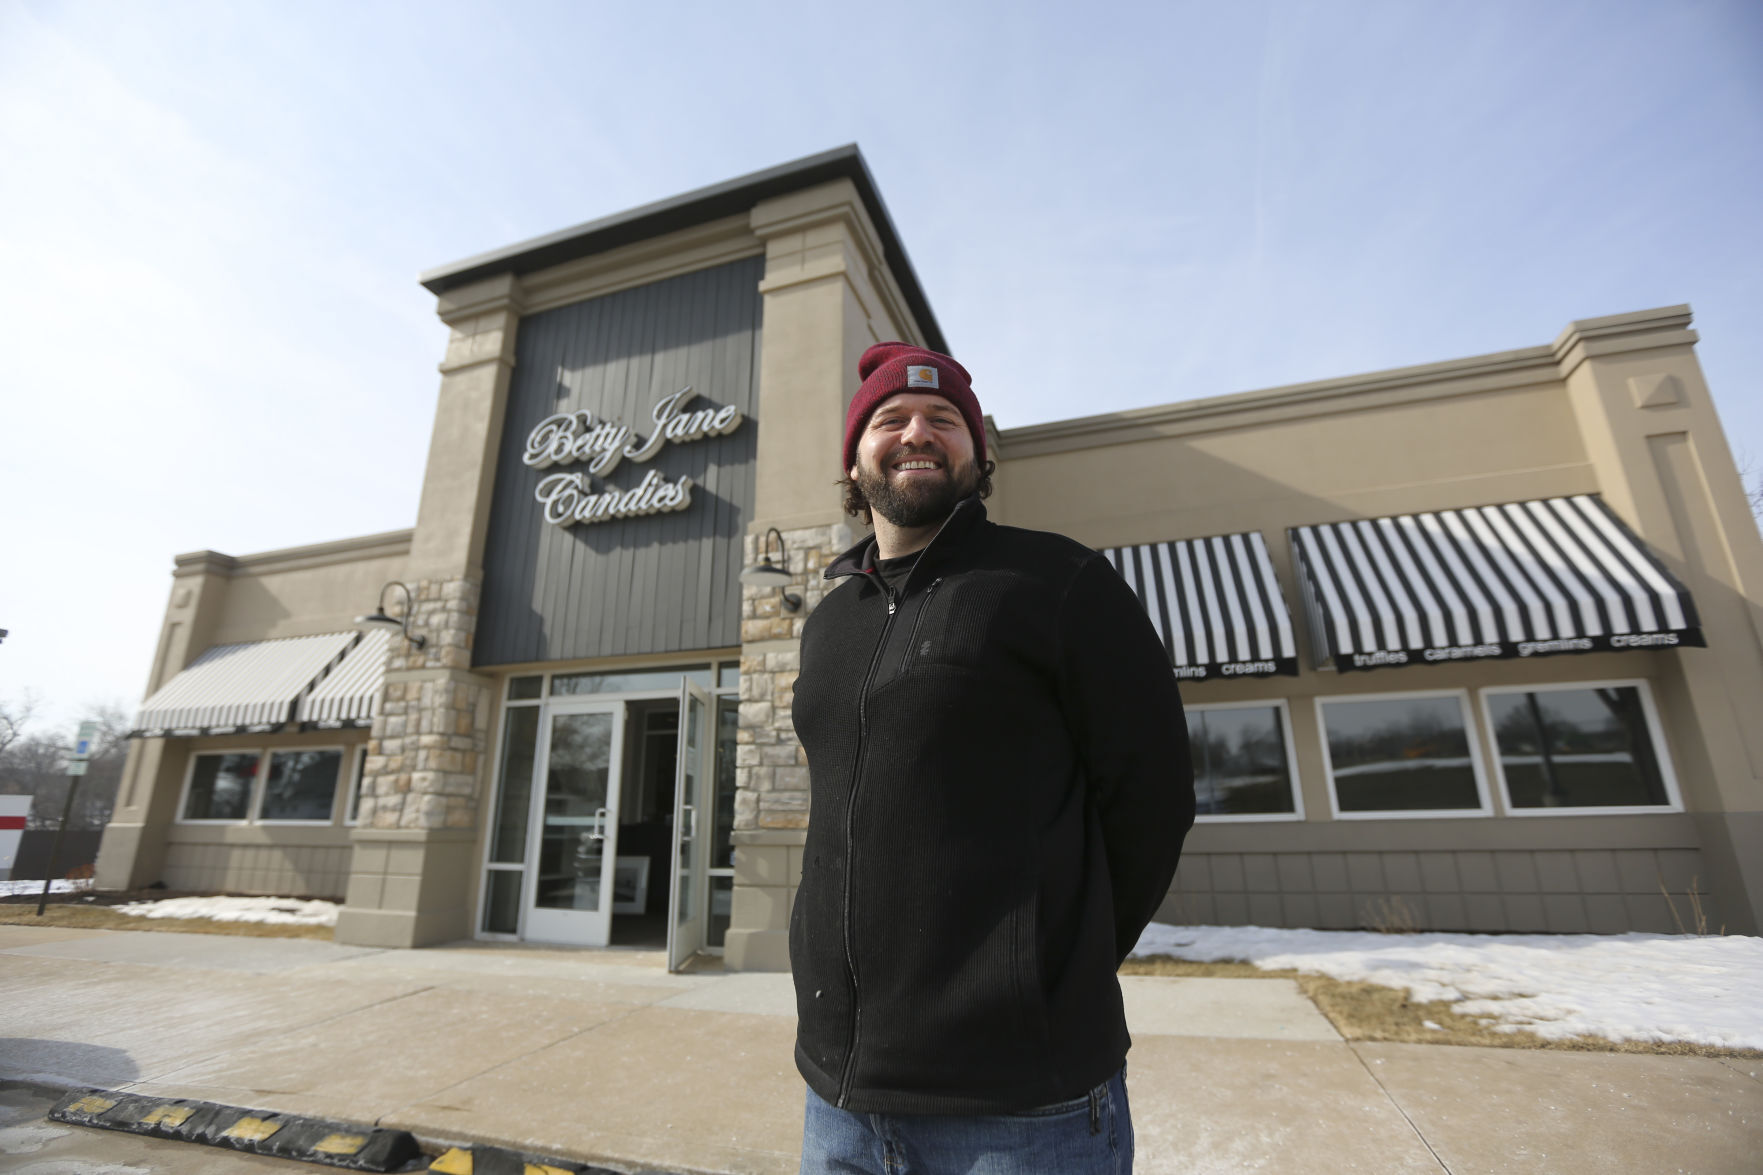 Drew Siegert, president of Betty Jane Candies, stands outside the new location.    PHOTO CREDIT: Dave Kettering